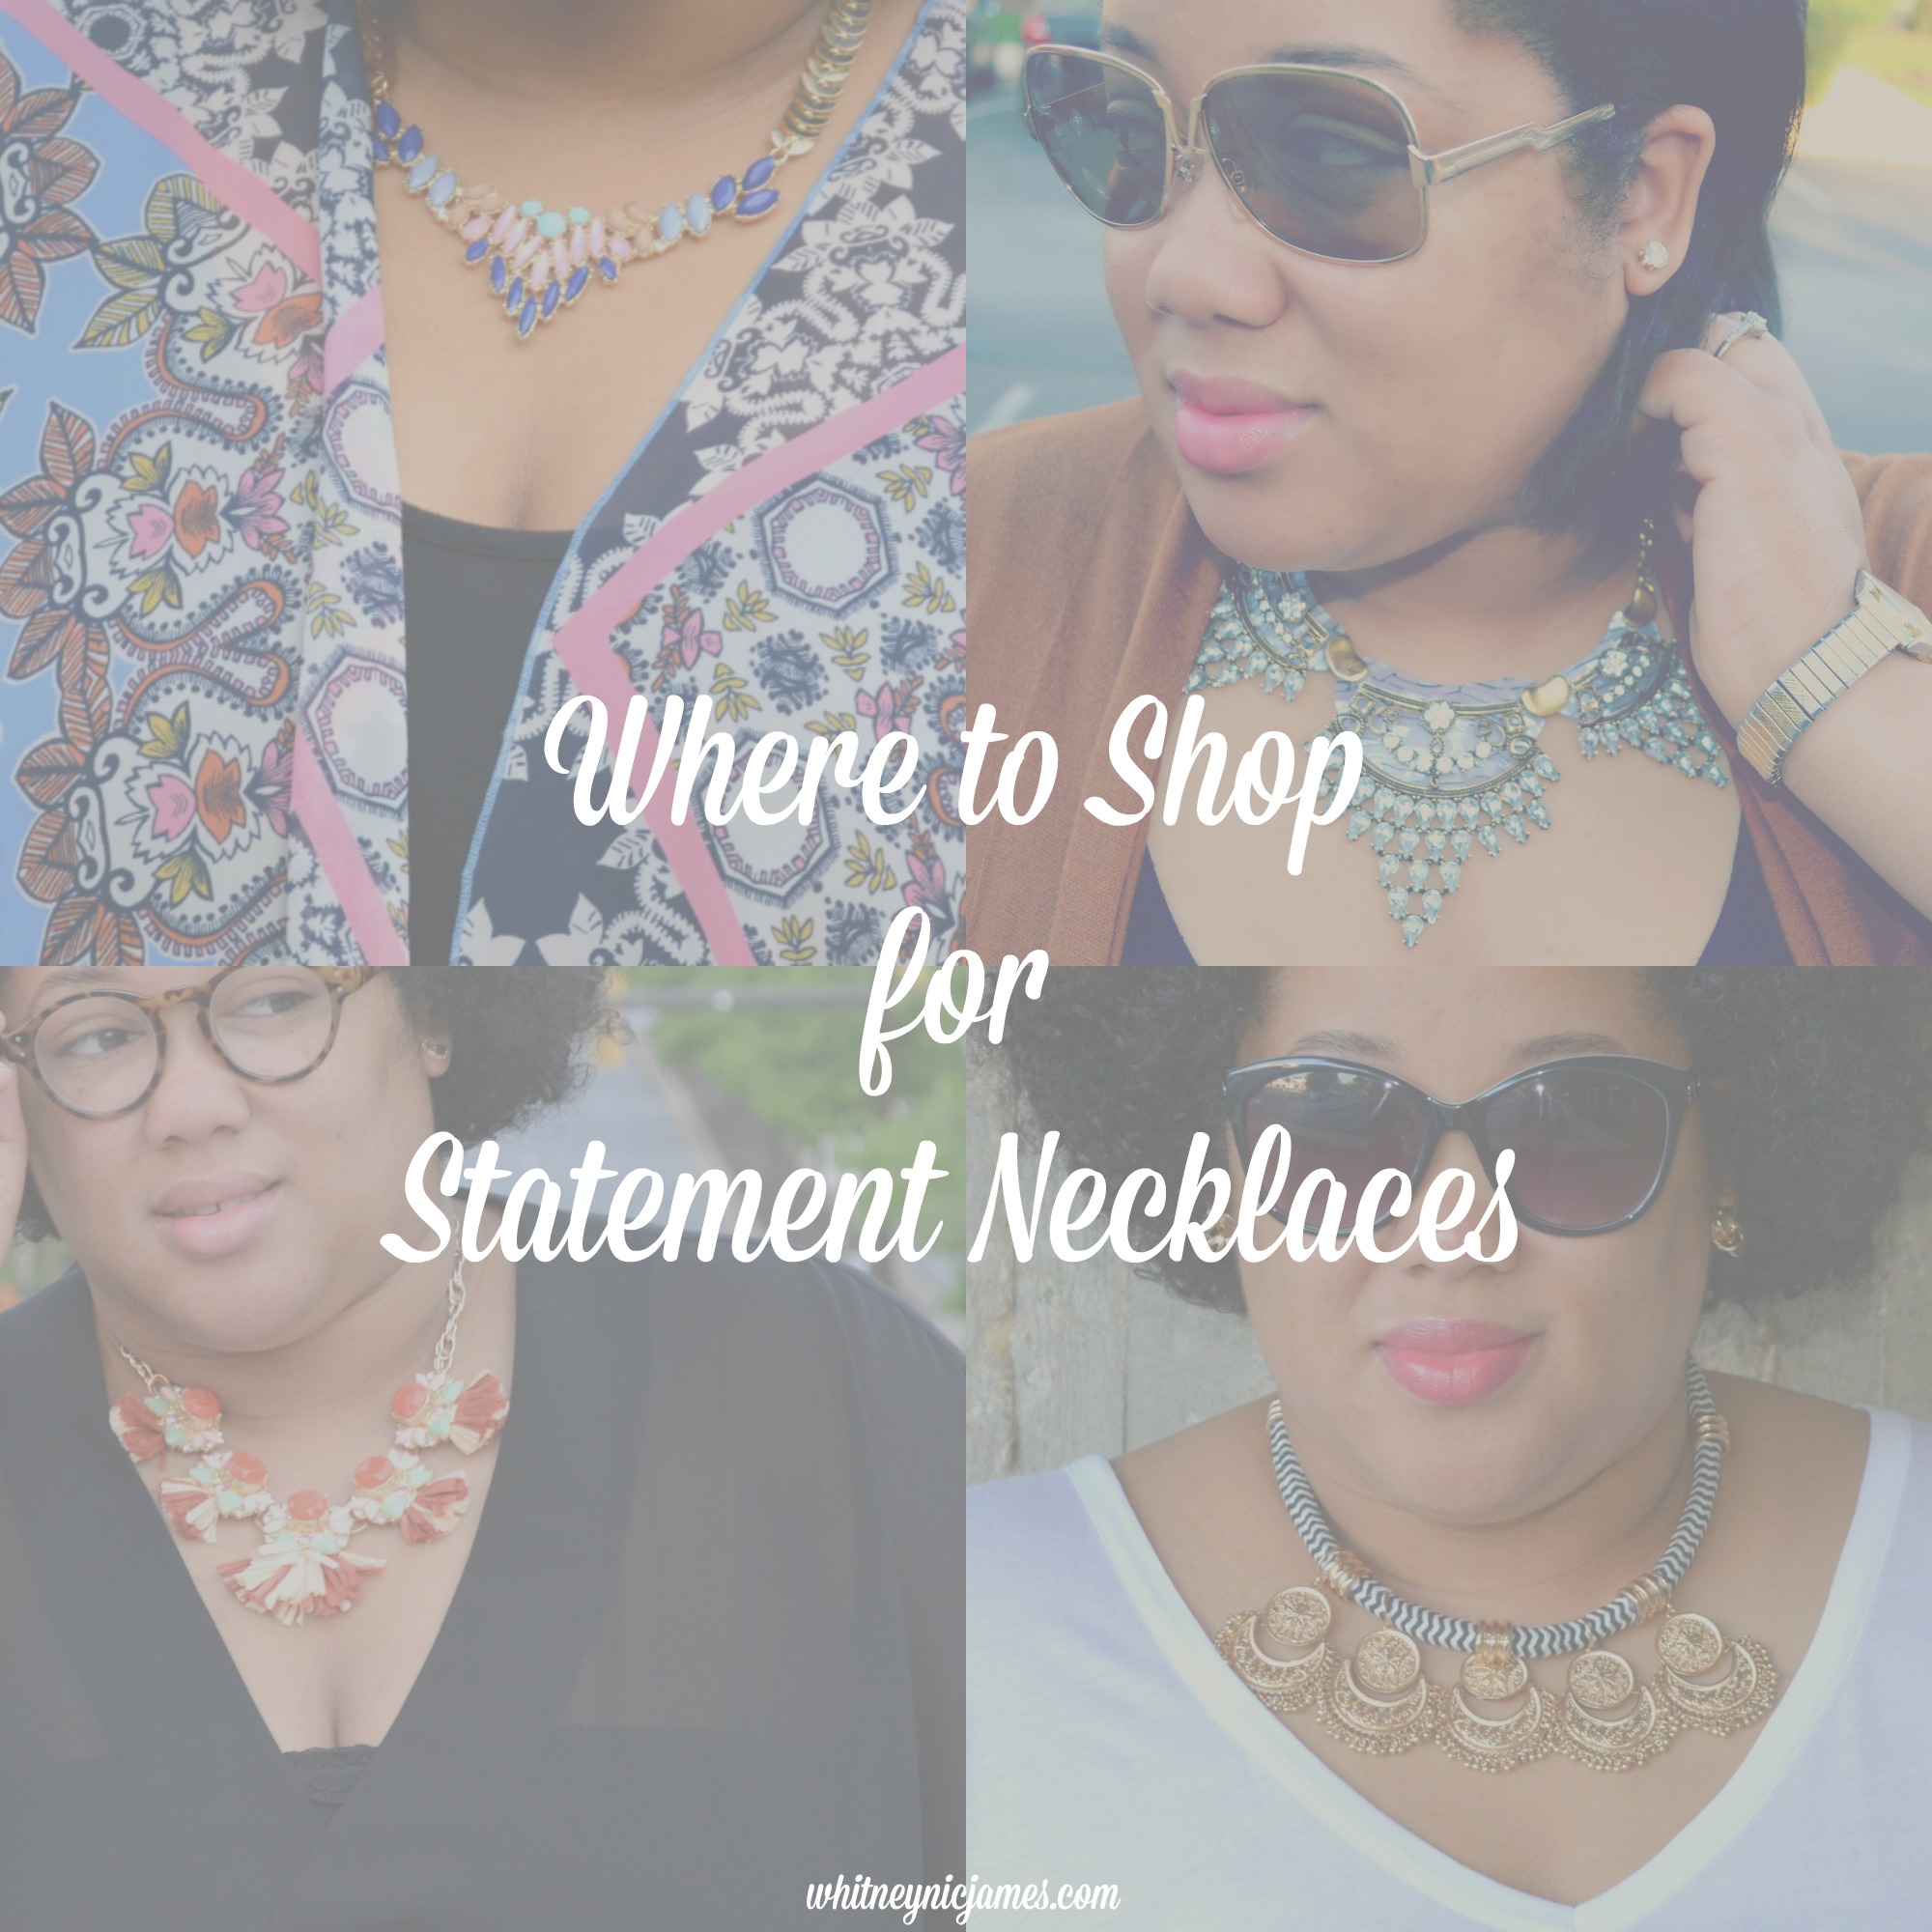 Affordable Statement Necklaces